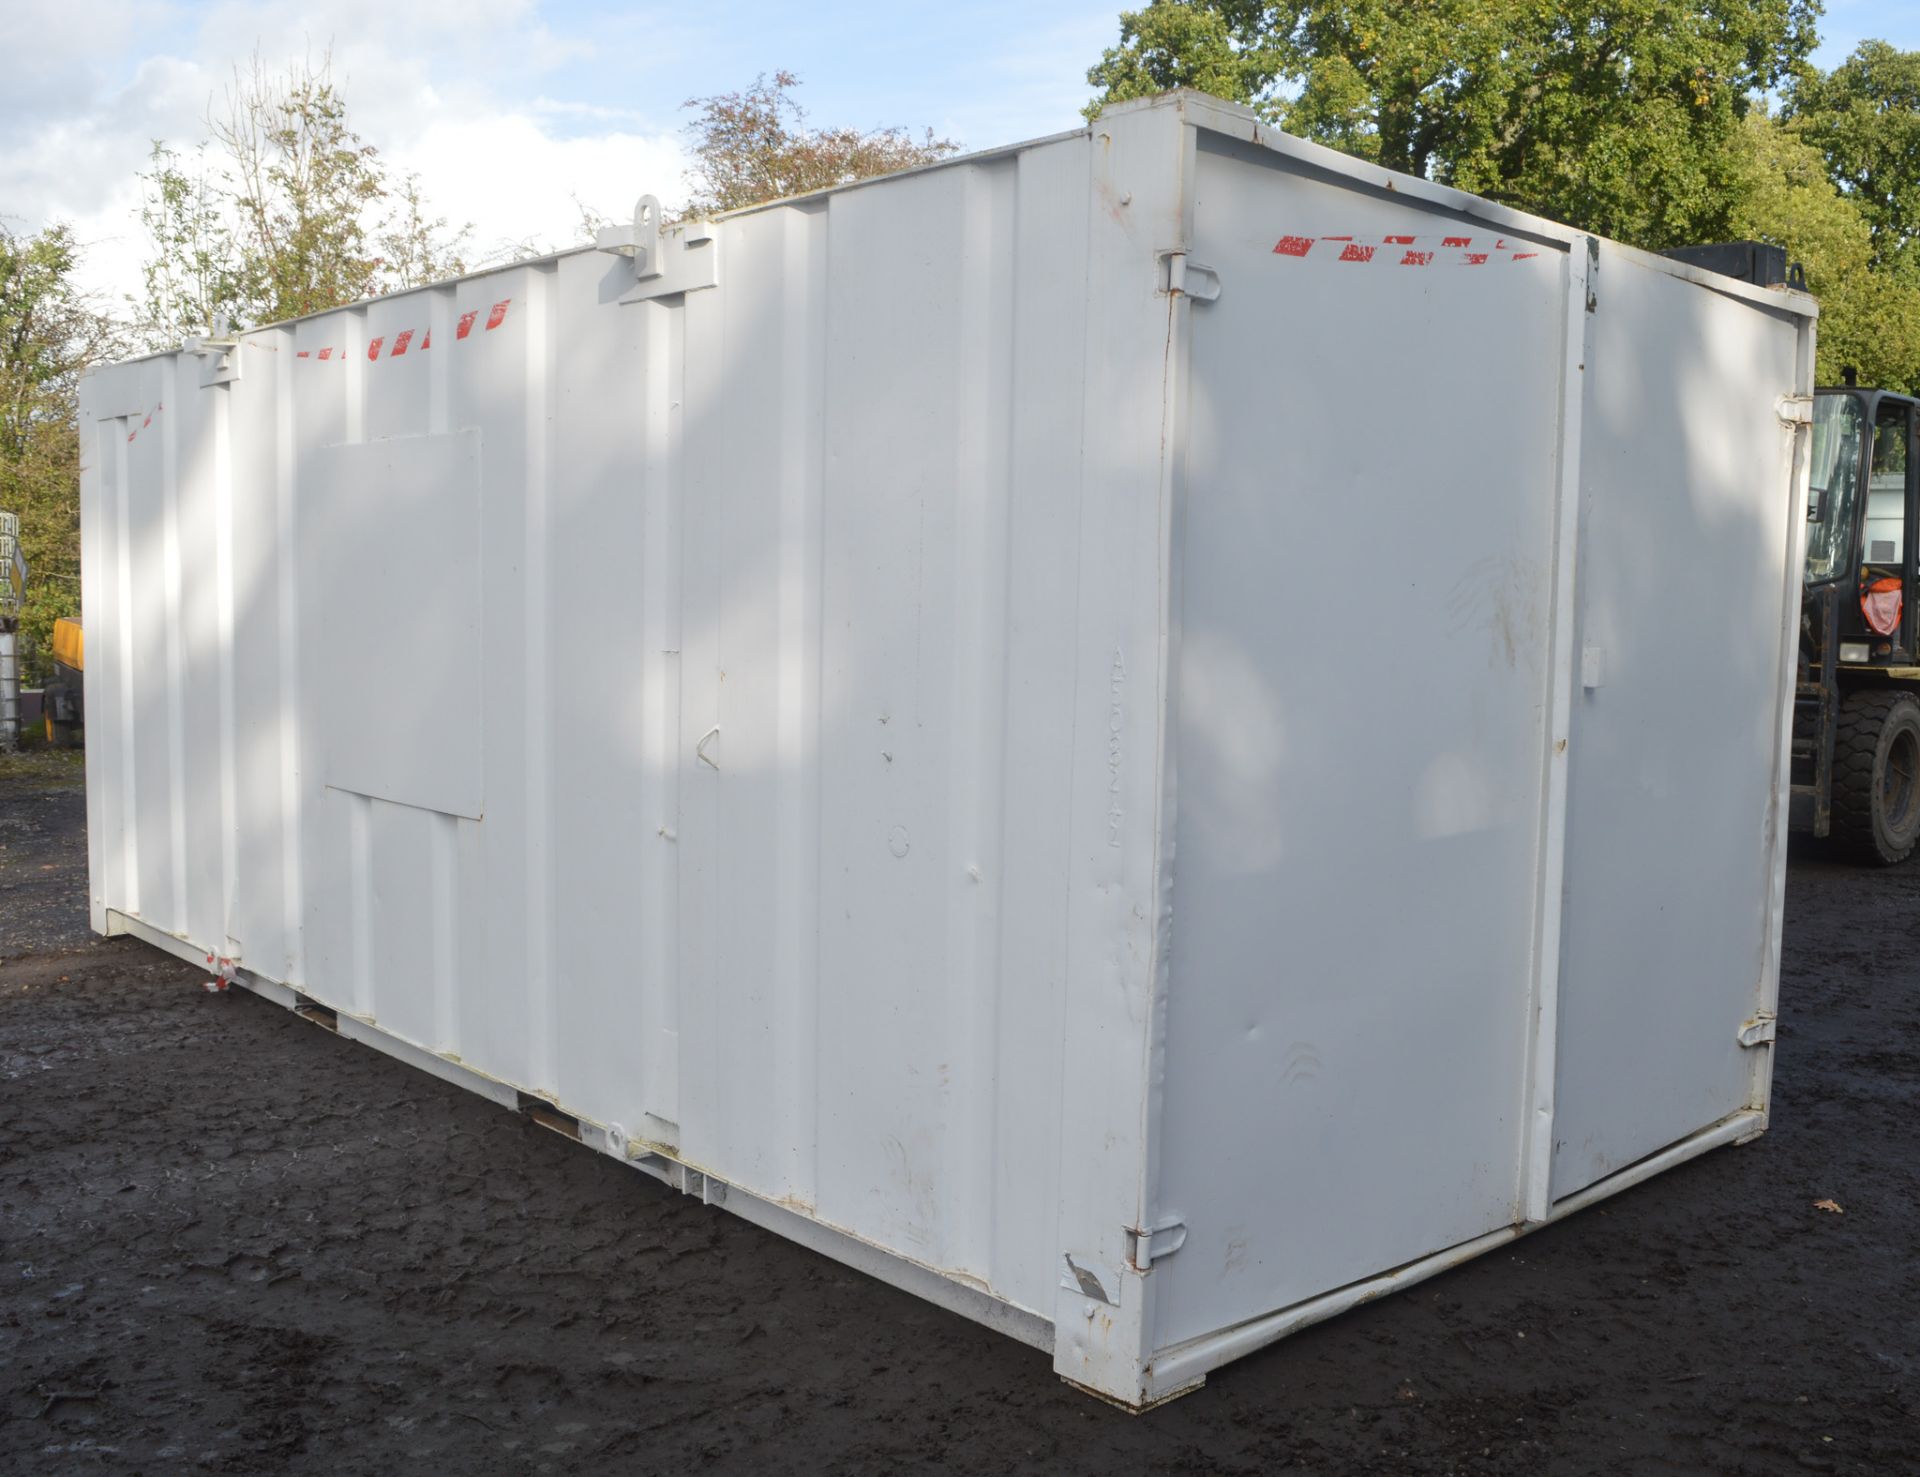 21 ft x 9 ft steel anti vandal shipping container  c/w keys in office  A508242 - Image 4 of 6